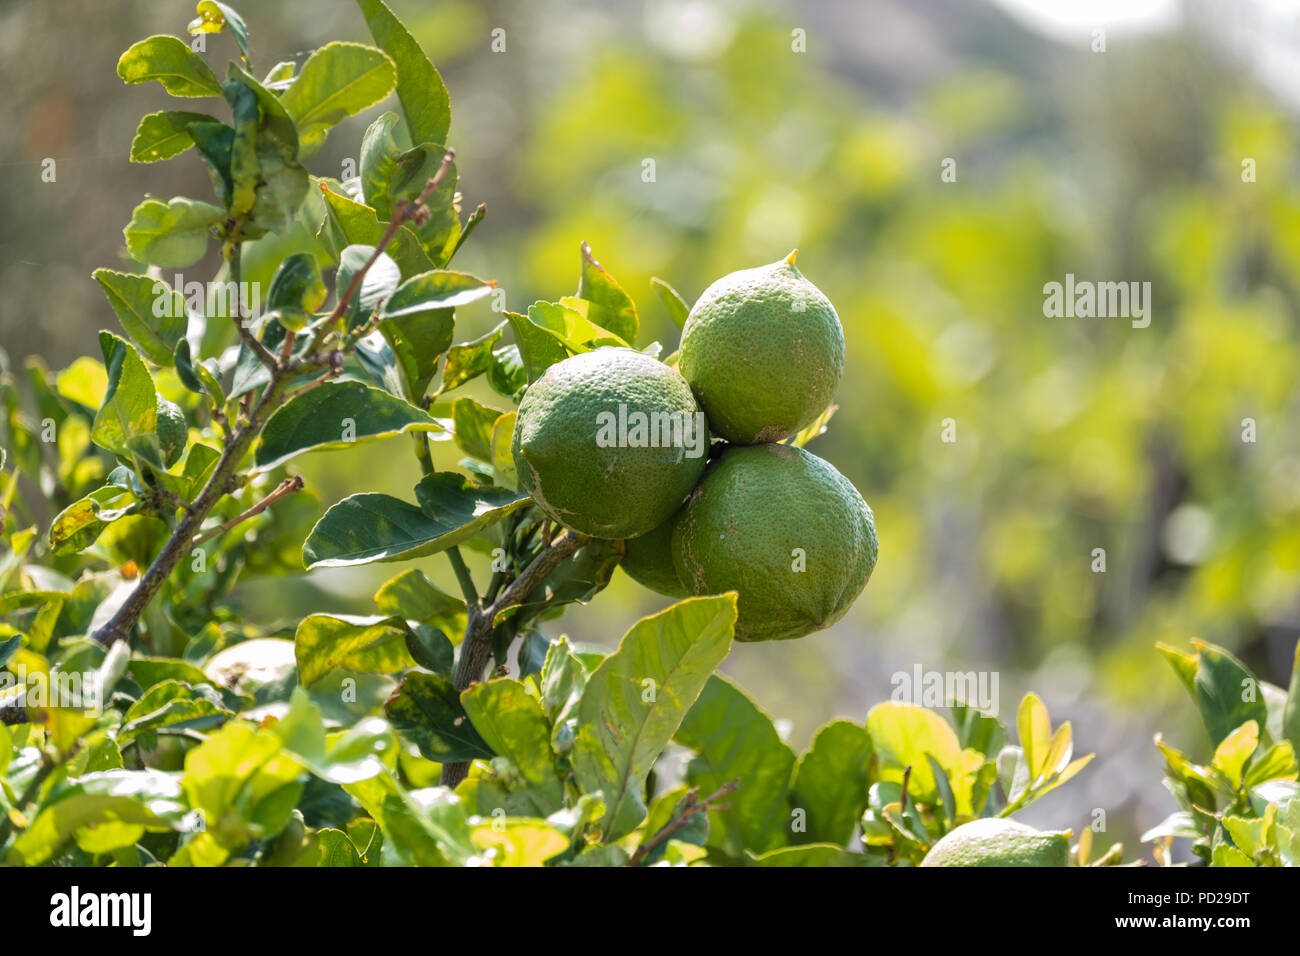 Green lemons before ripening, Citrus limon (L.) Osbeck, from the flowering plant family Rutaceae, now sold in Tesco, Saronida, Greece. Stock Photo